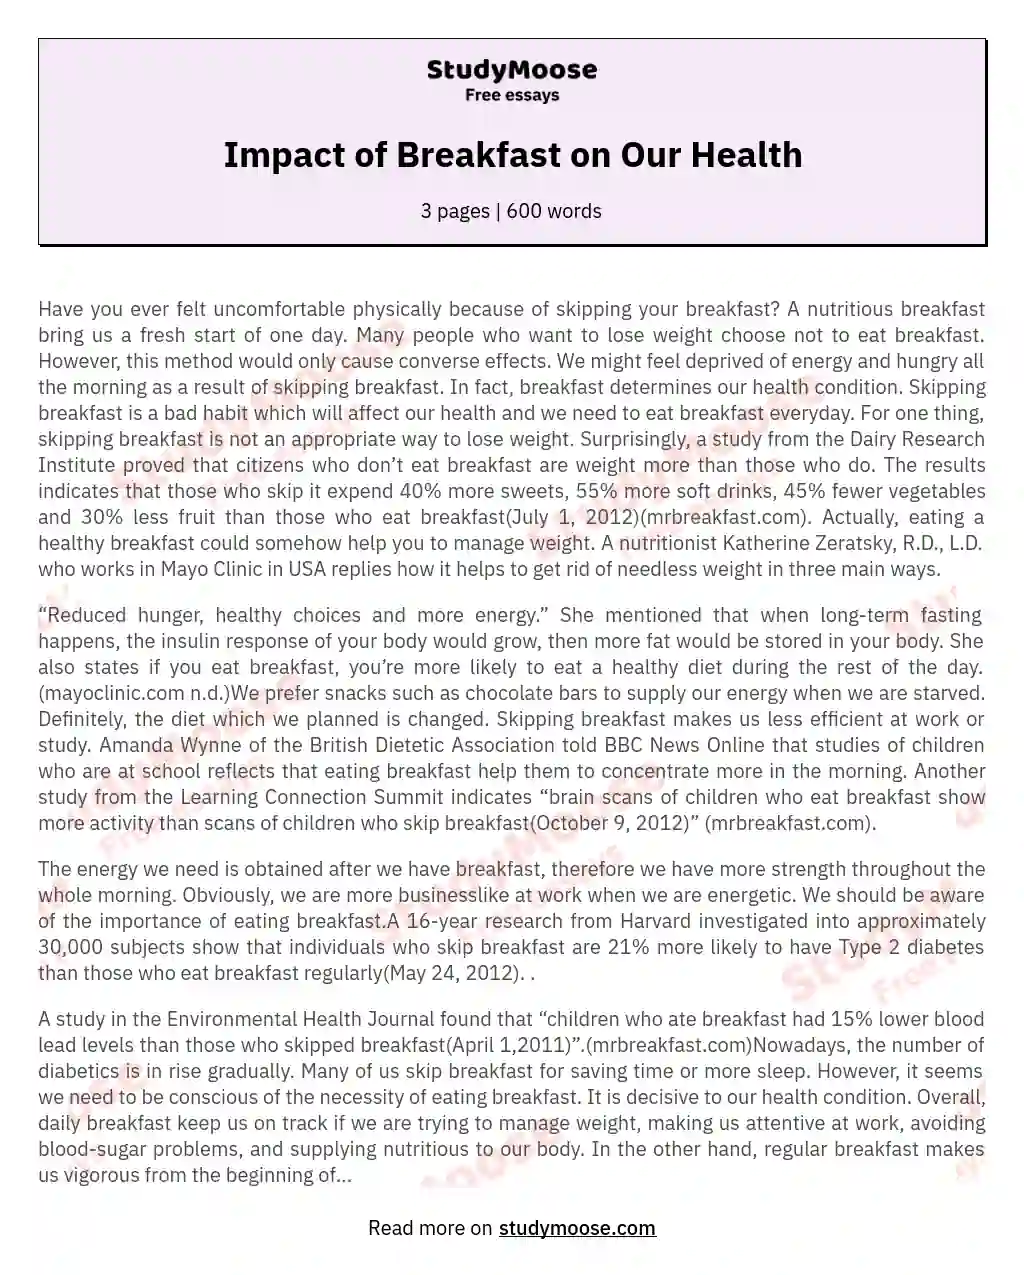 Impact of Breakfast on Our Health essay